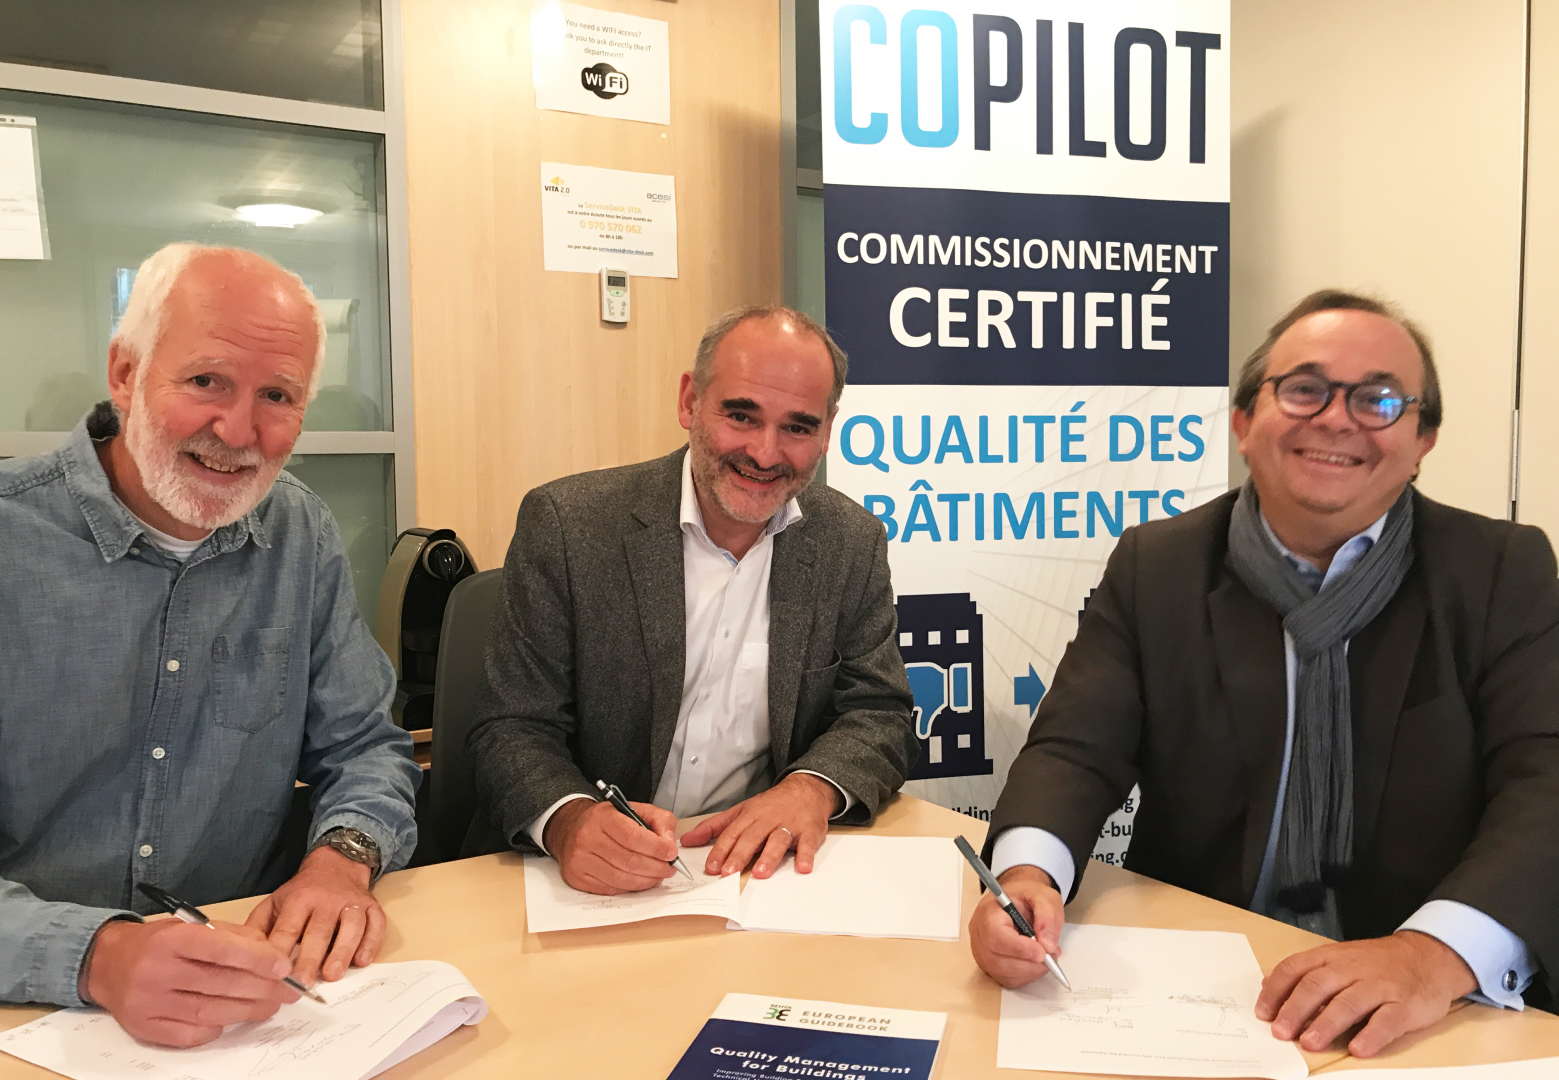 2019 - COPILOT Certificate becomes new standard for building performance